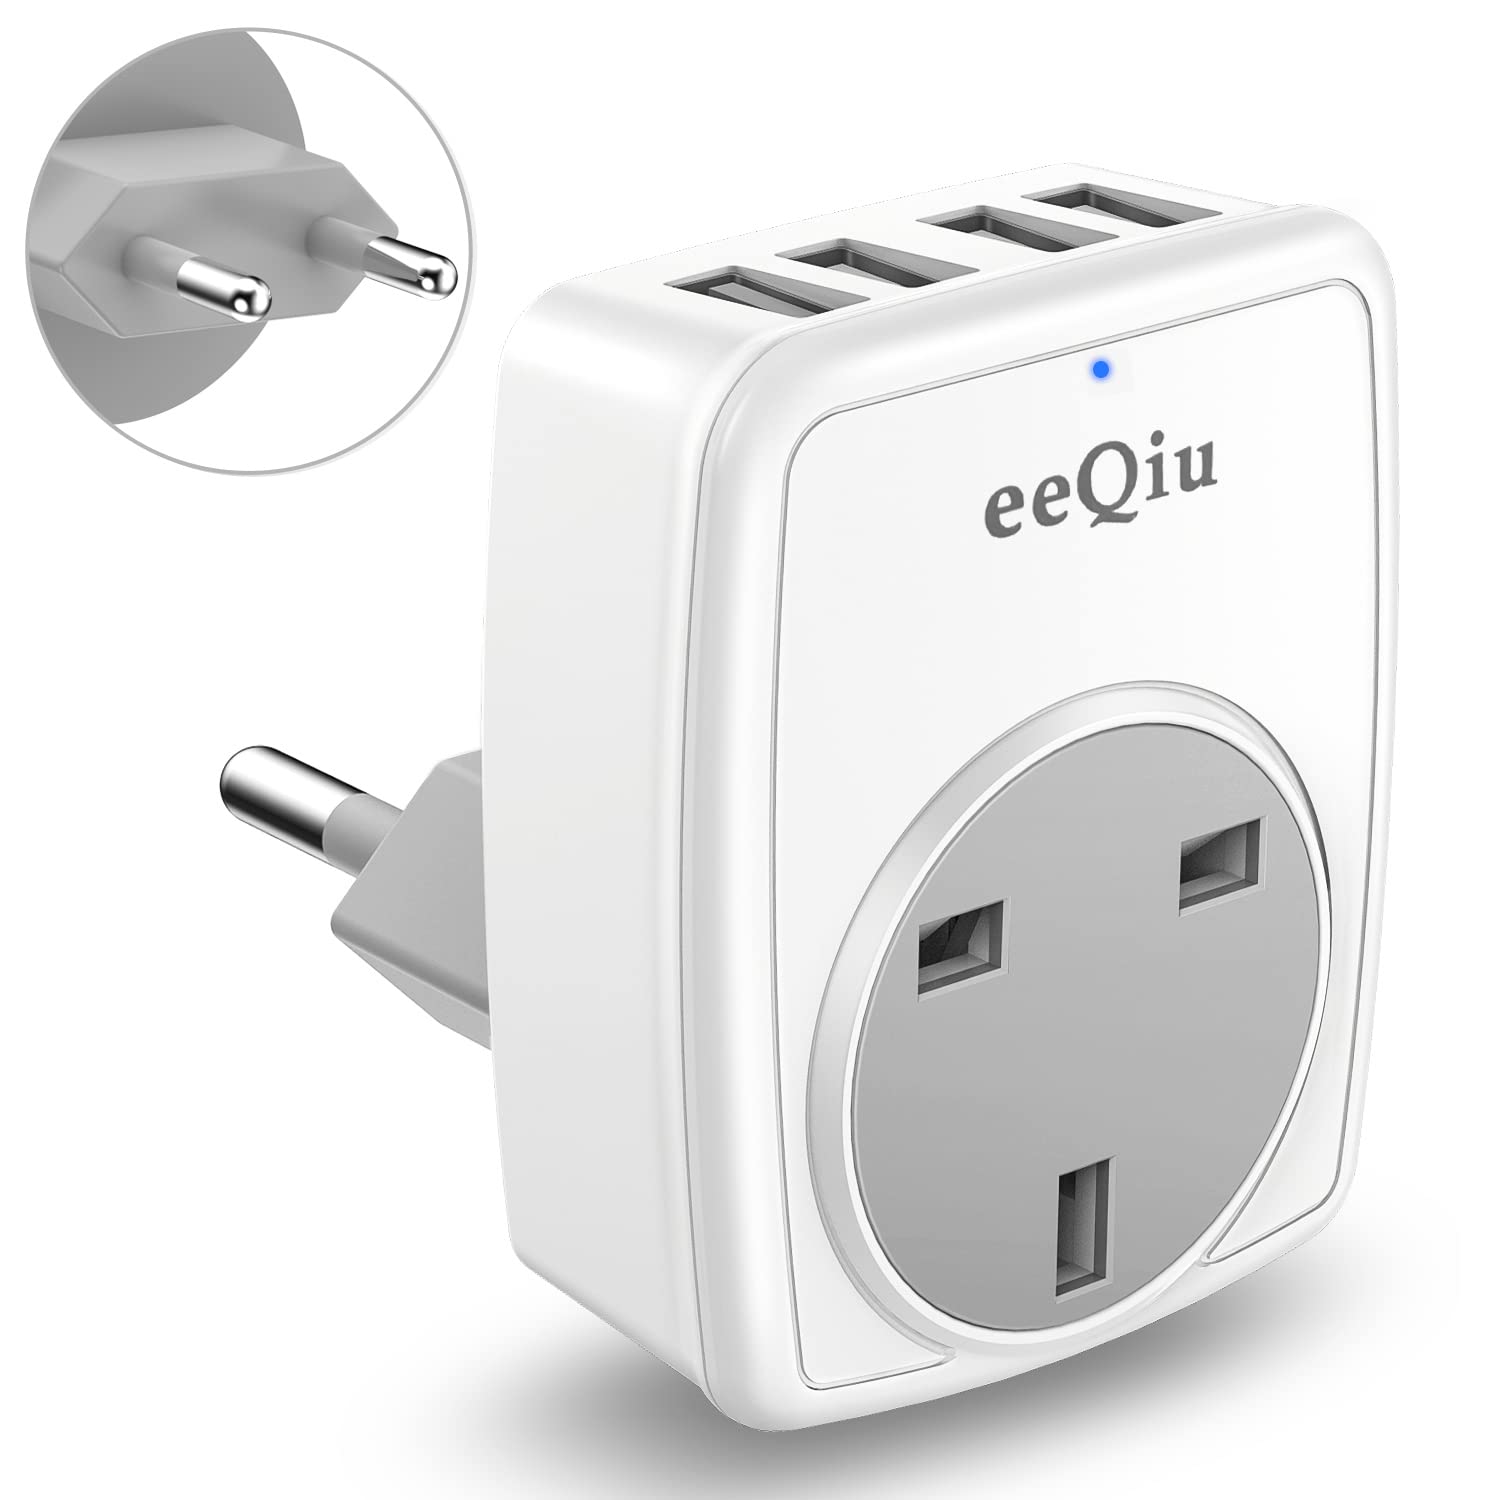 UK to EU Euro Europe Plug Adapter with 4 USB Ports, eeQiu 5 IN 1 European Travel Adapter for Italy Switzerland Turkey Germany Spain Iceland Greece Portugal Russia Netherlands and more (Type C)